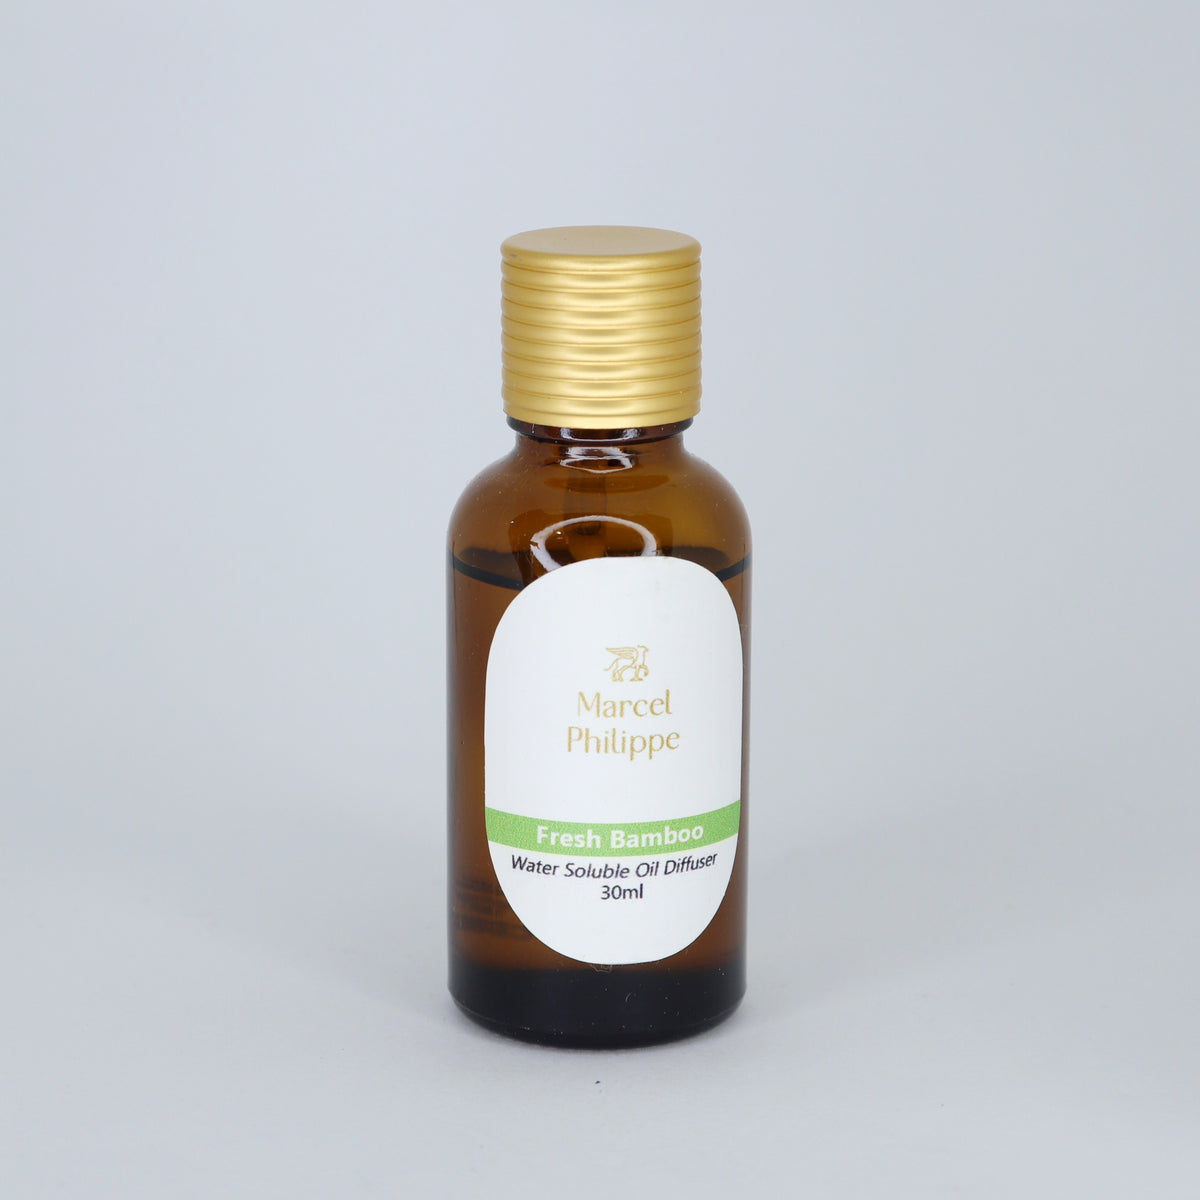 Marcel Philippe Water Soluble Oil Diffuser 30ml